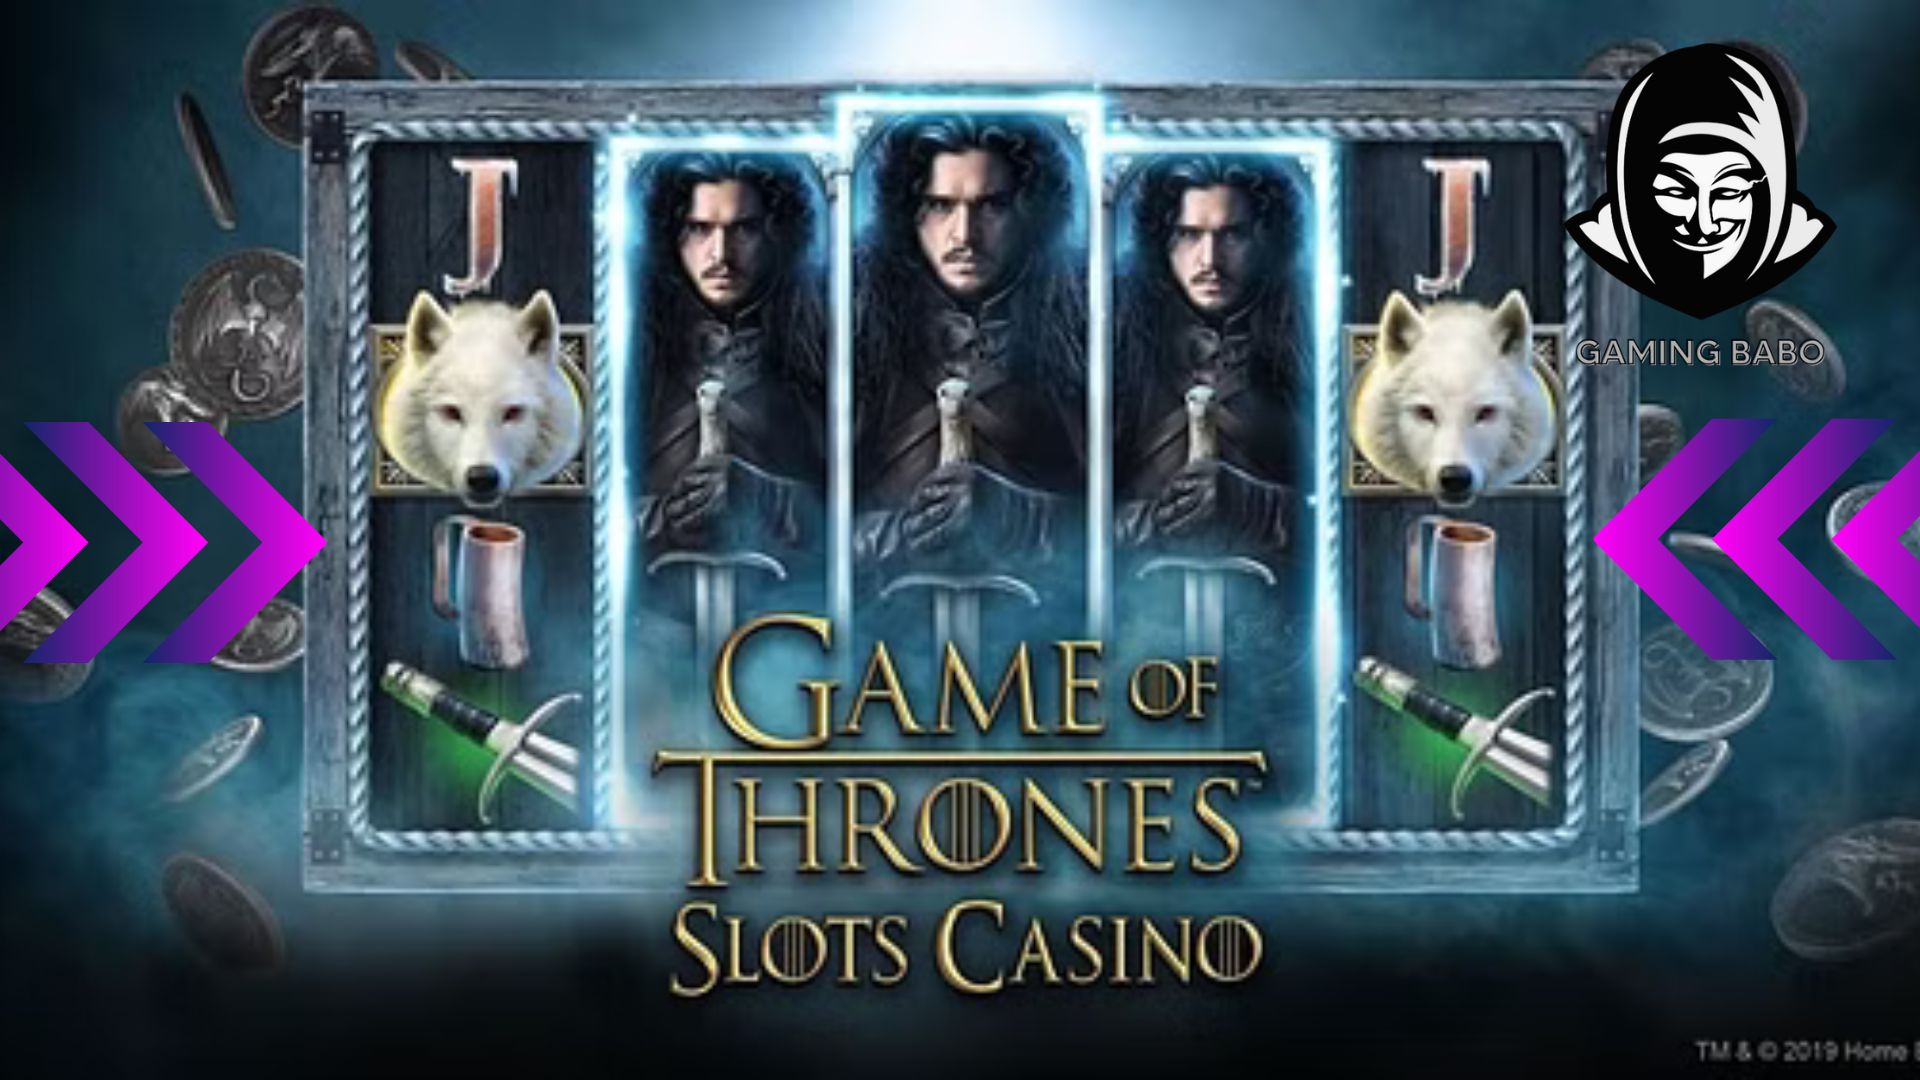 Game of Thrones Slots Zynga tips and tricks